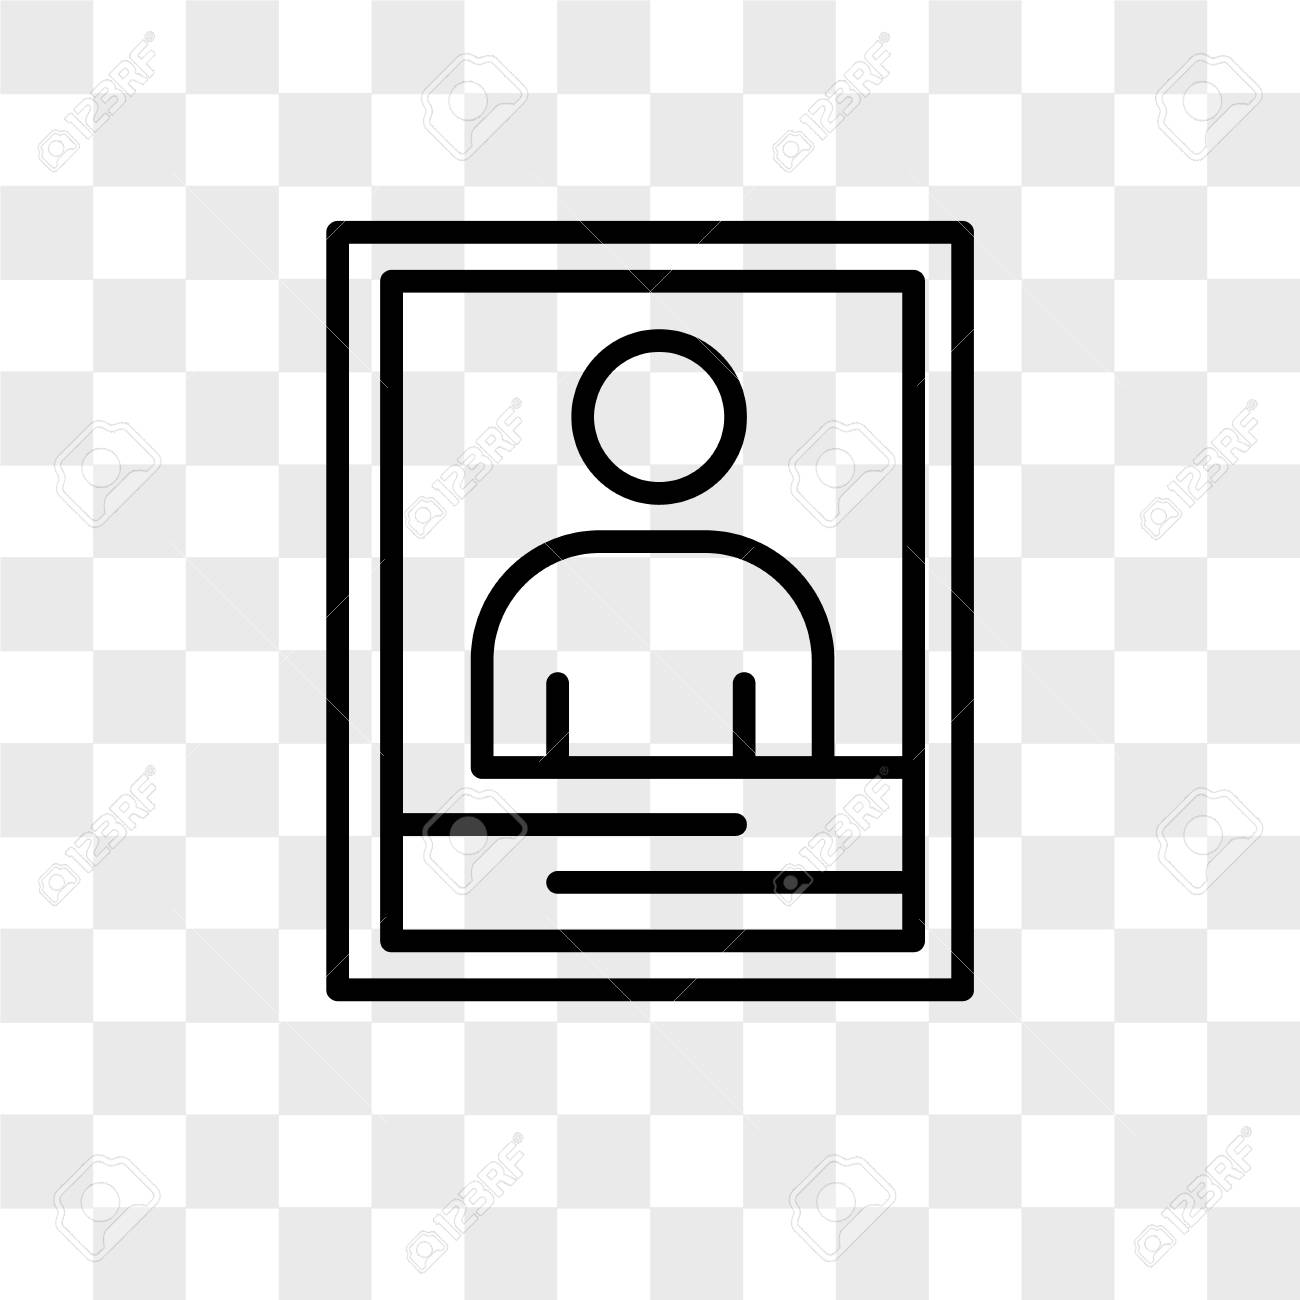 Yearbook Vector Icon Isolated On Transparent Background